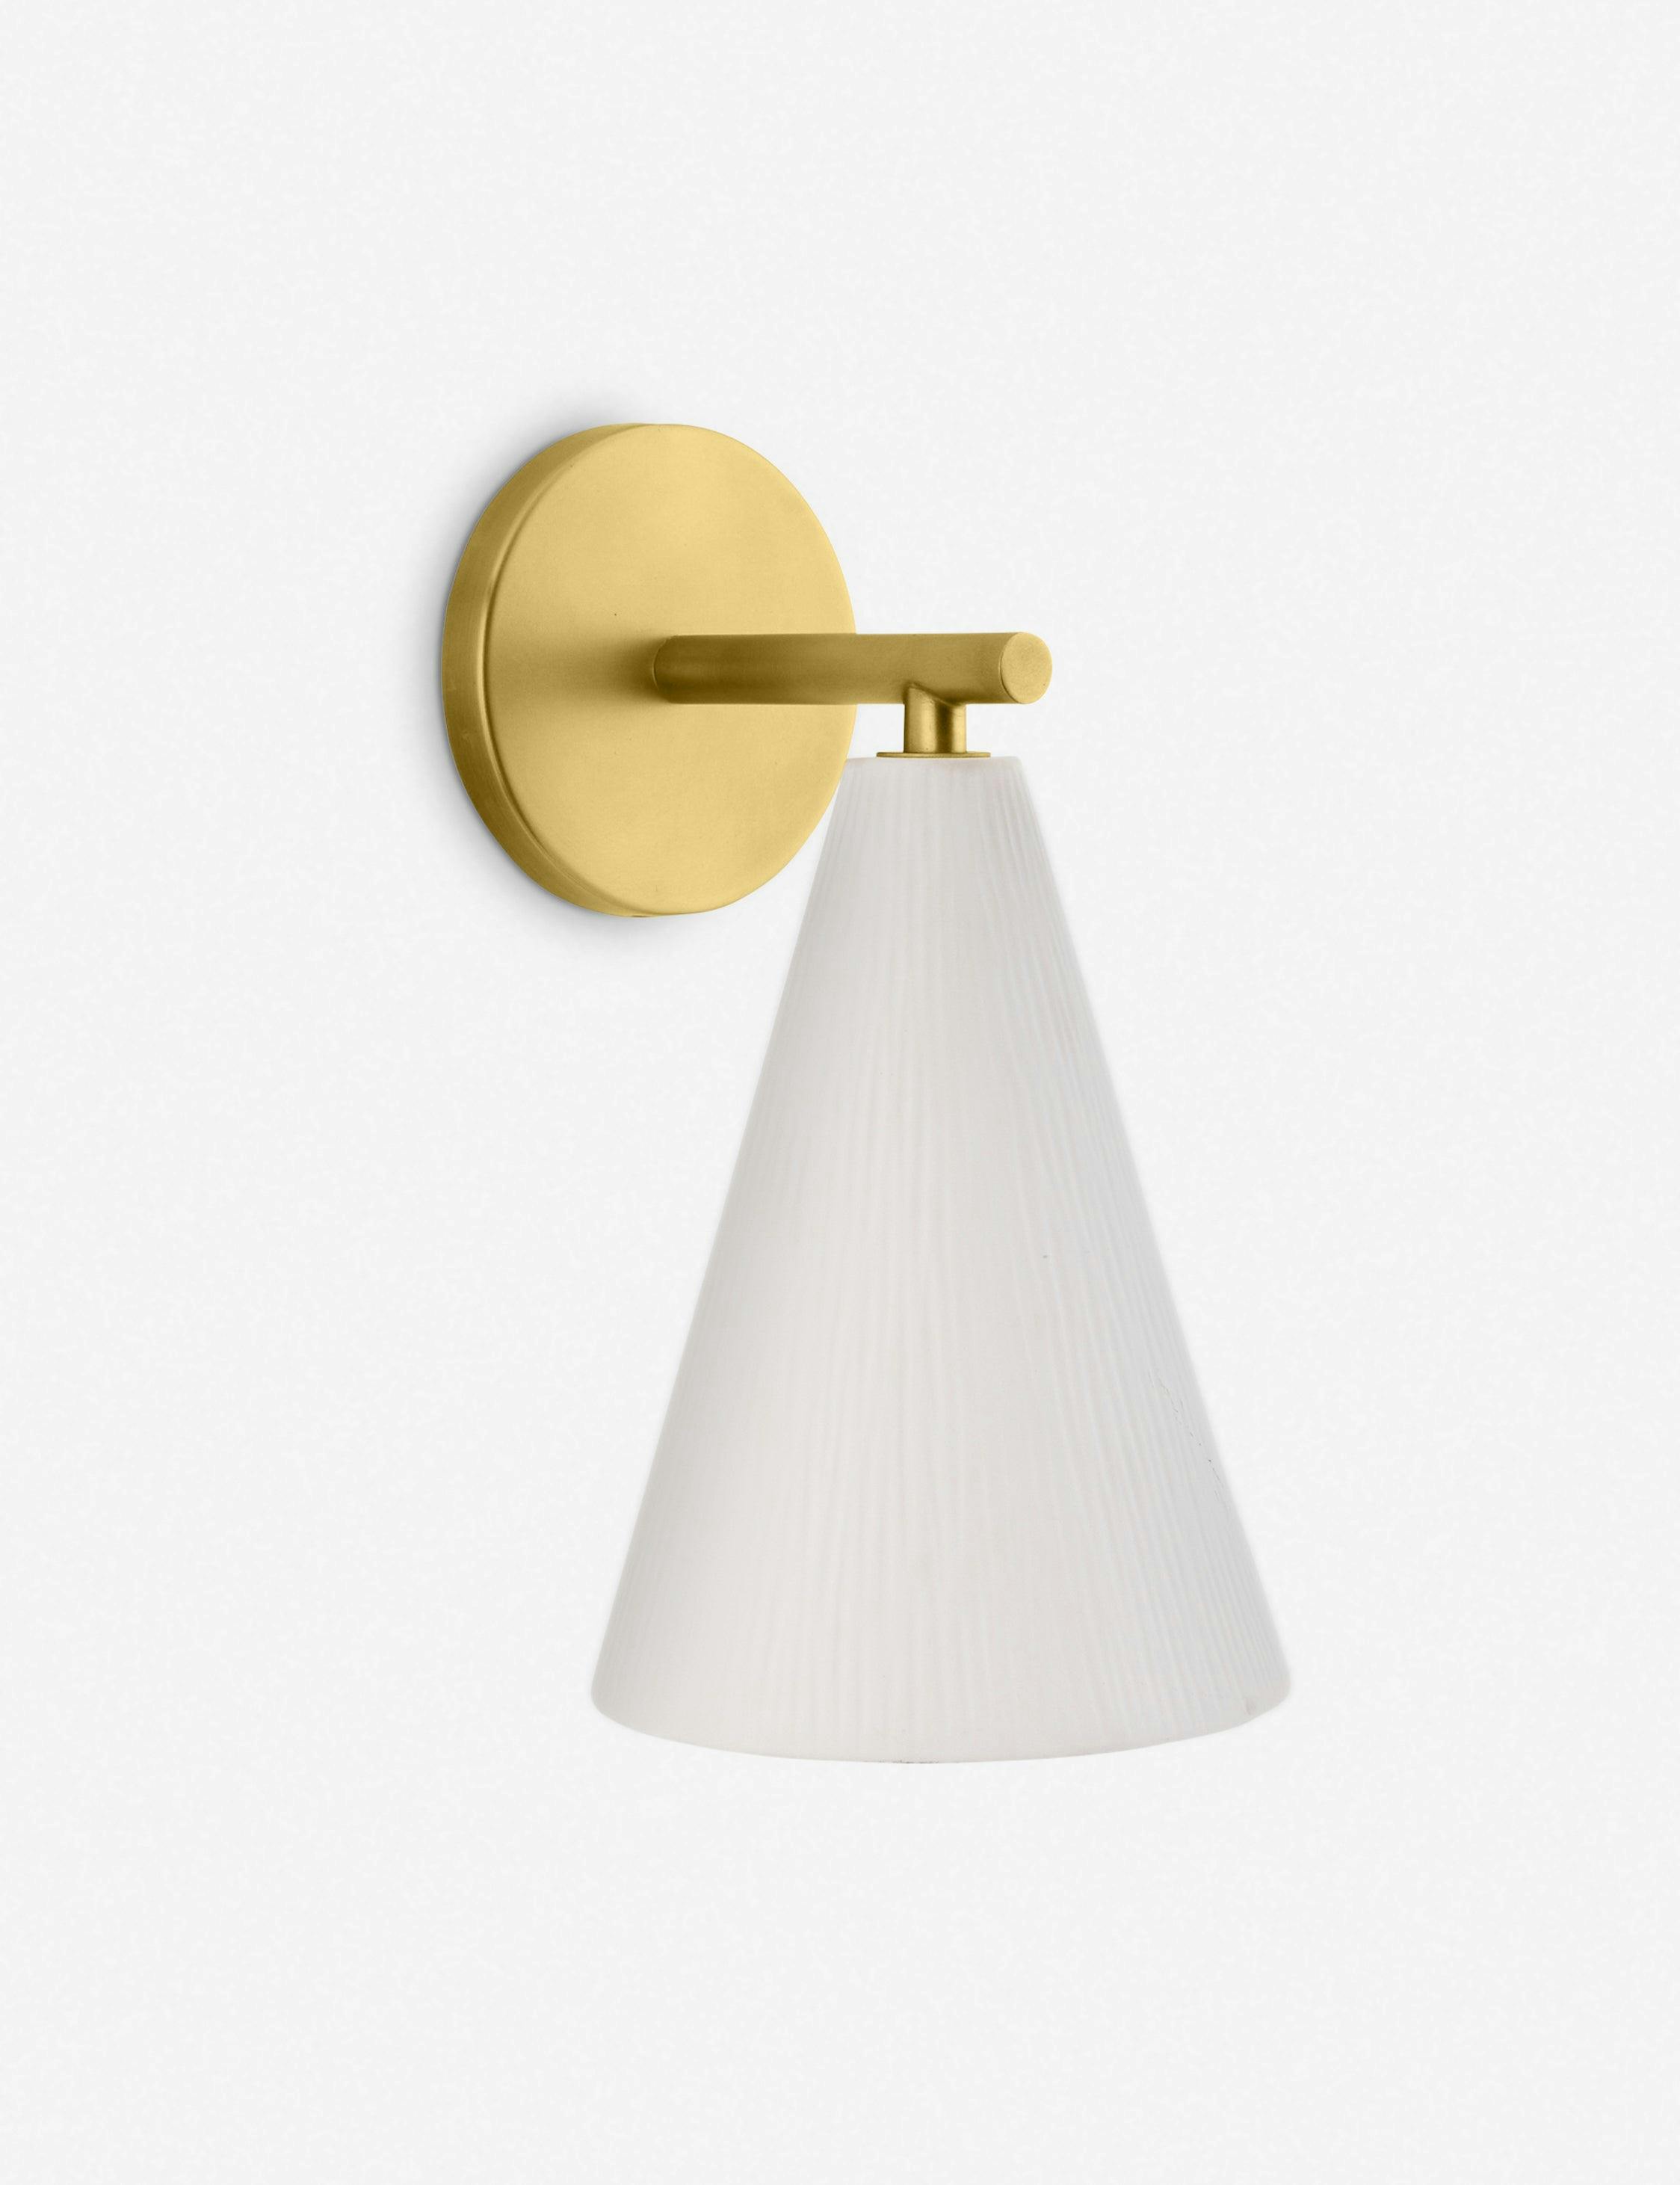 Oakland Sconce by Arteriors - Antique Brass